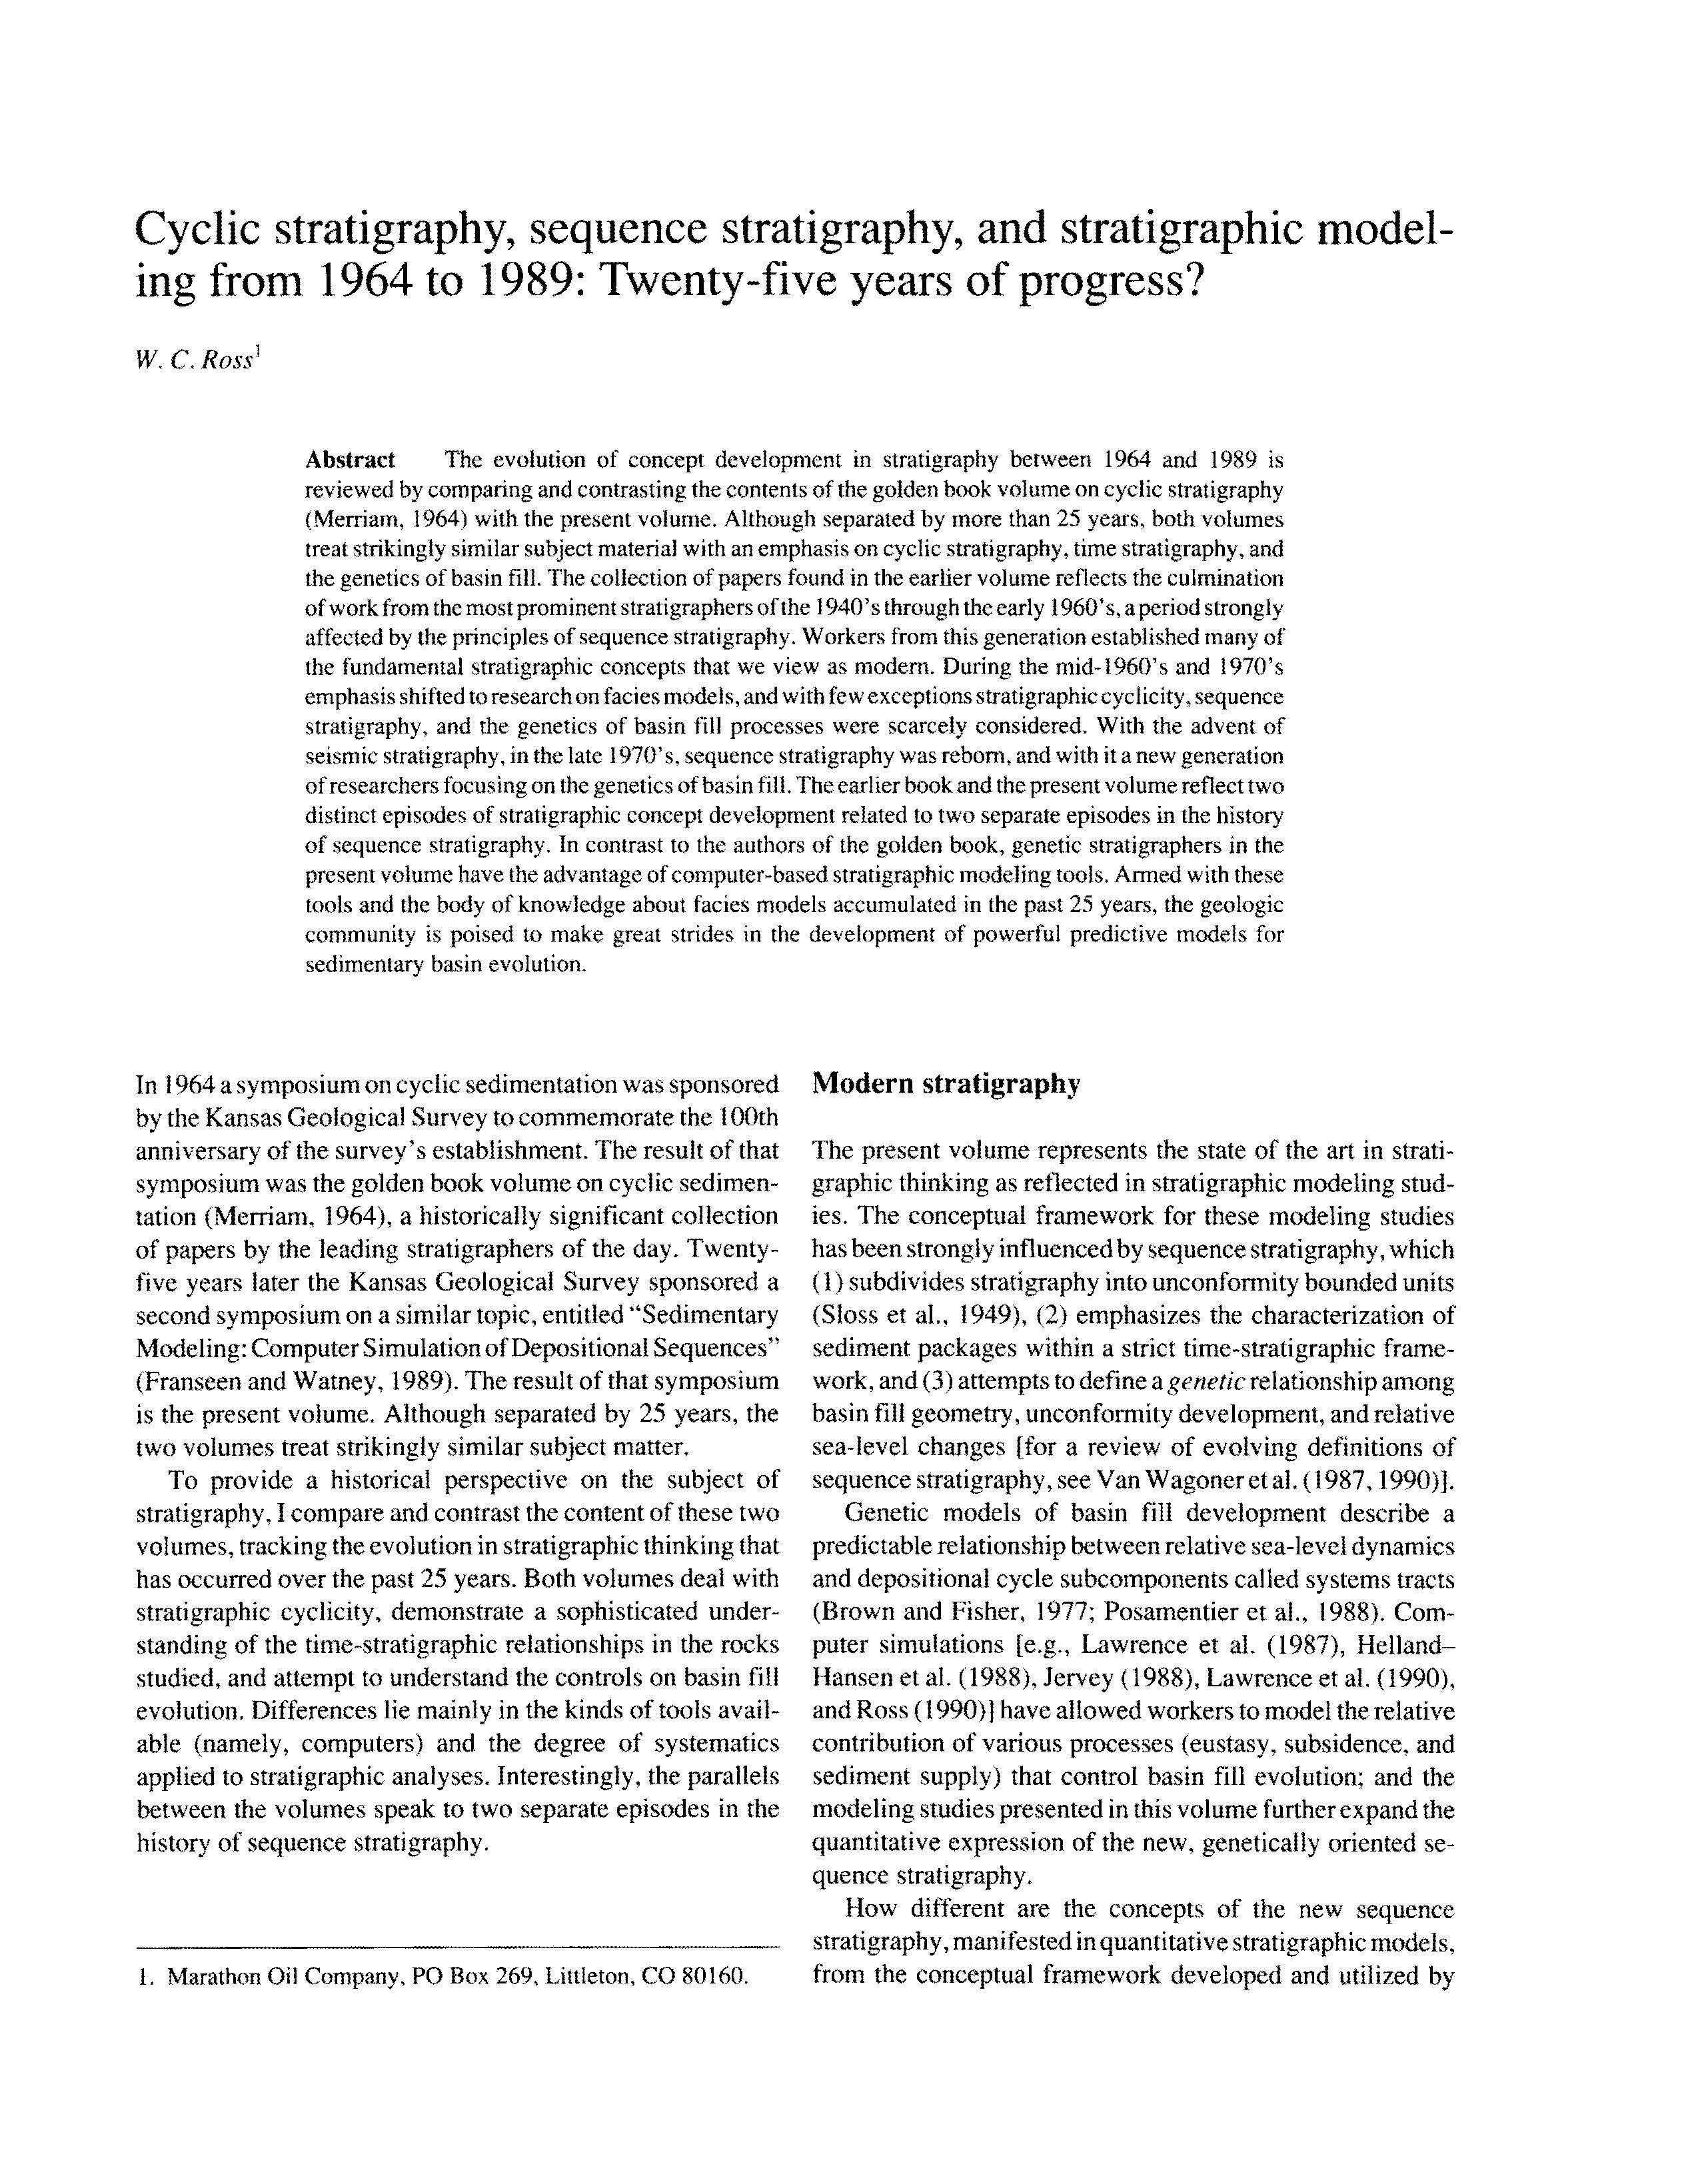 					View No. 233 (1991): Sedimentary Modeling - Computer Simulations and Methods for Improved Parameter Definition
				